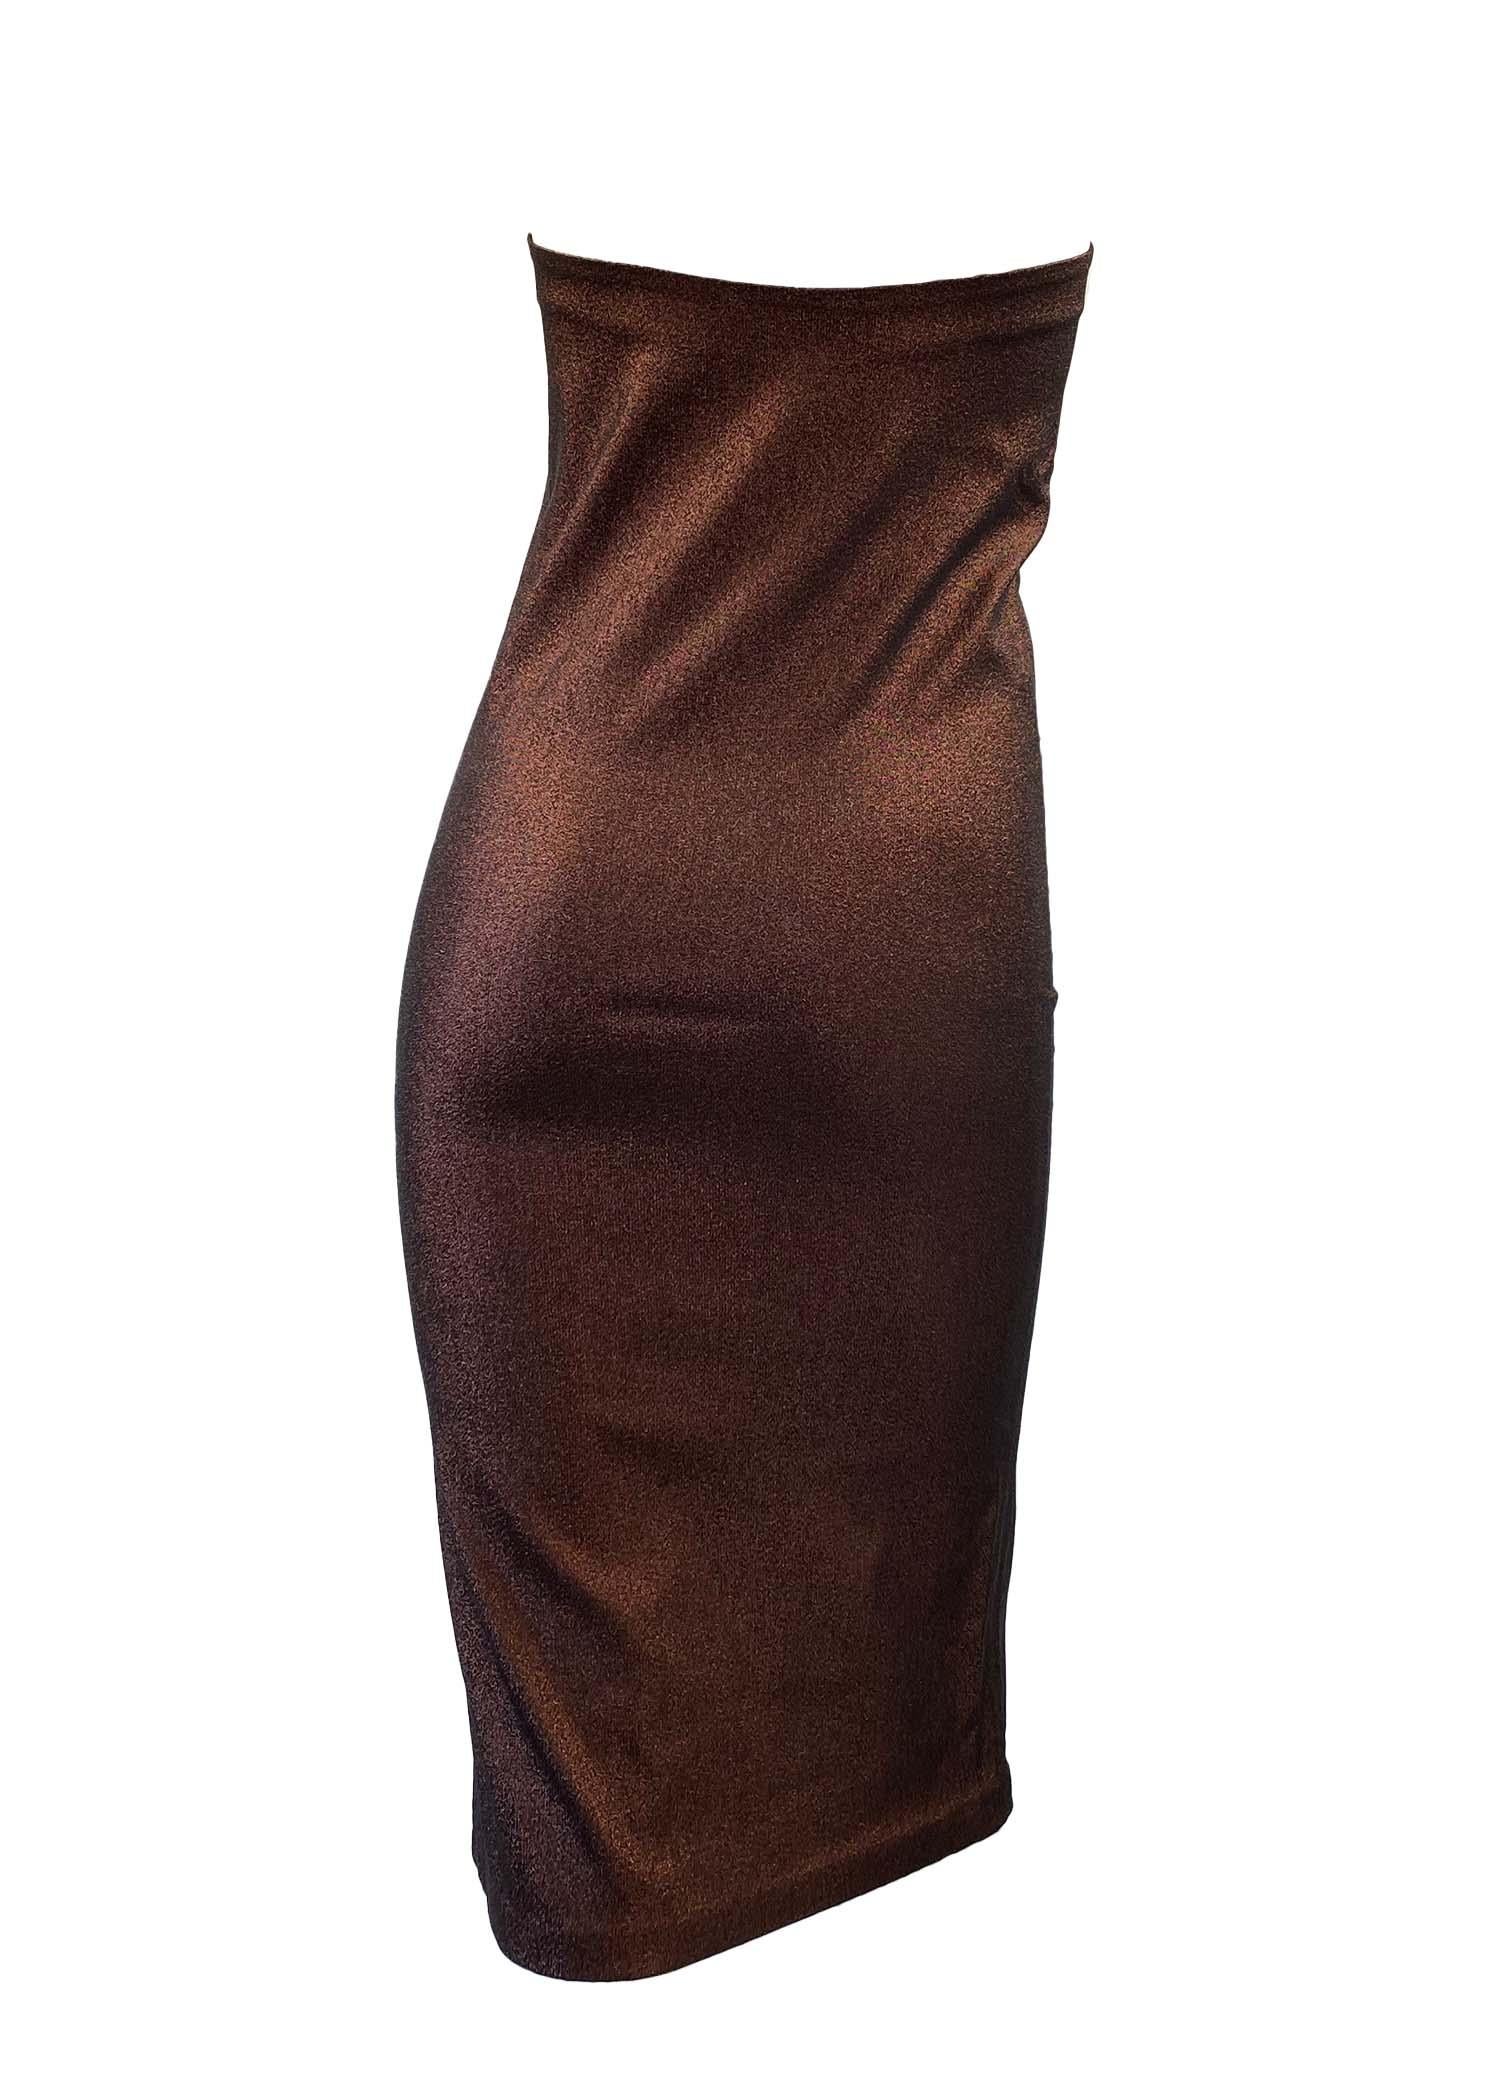 Black S/S 1997 Gucci by Tom Ford Brown Lurex Metallic Stretch Strapless Tube Dress For Sale